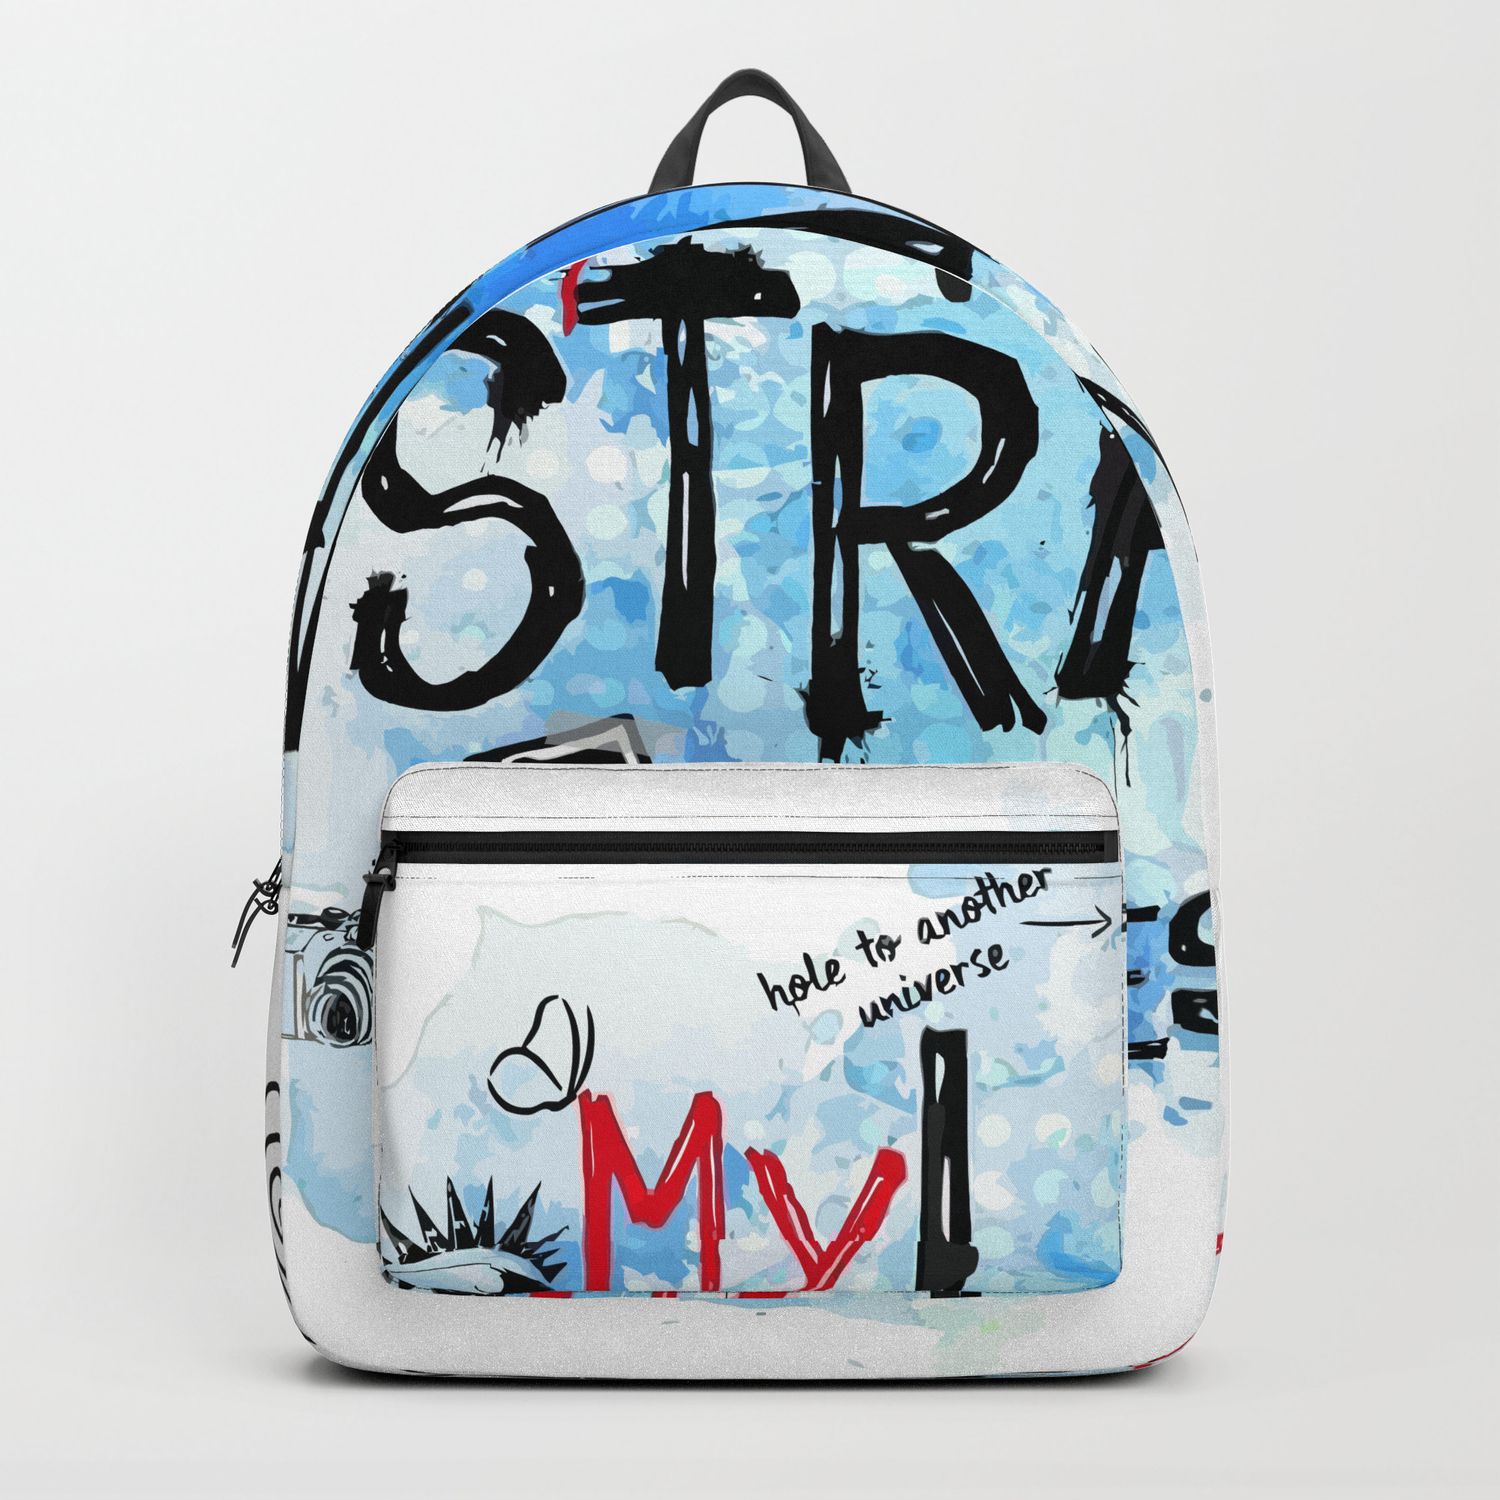 Clothes Tram Chip My life is strange! Backpack by Perfect | Society6